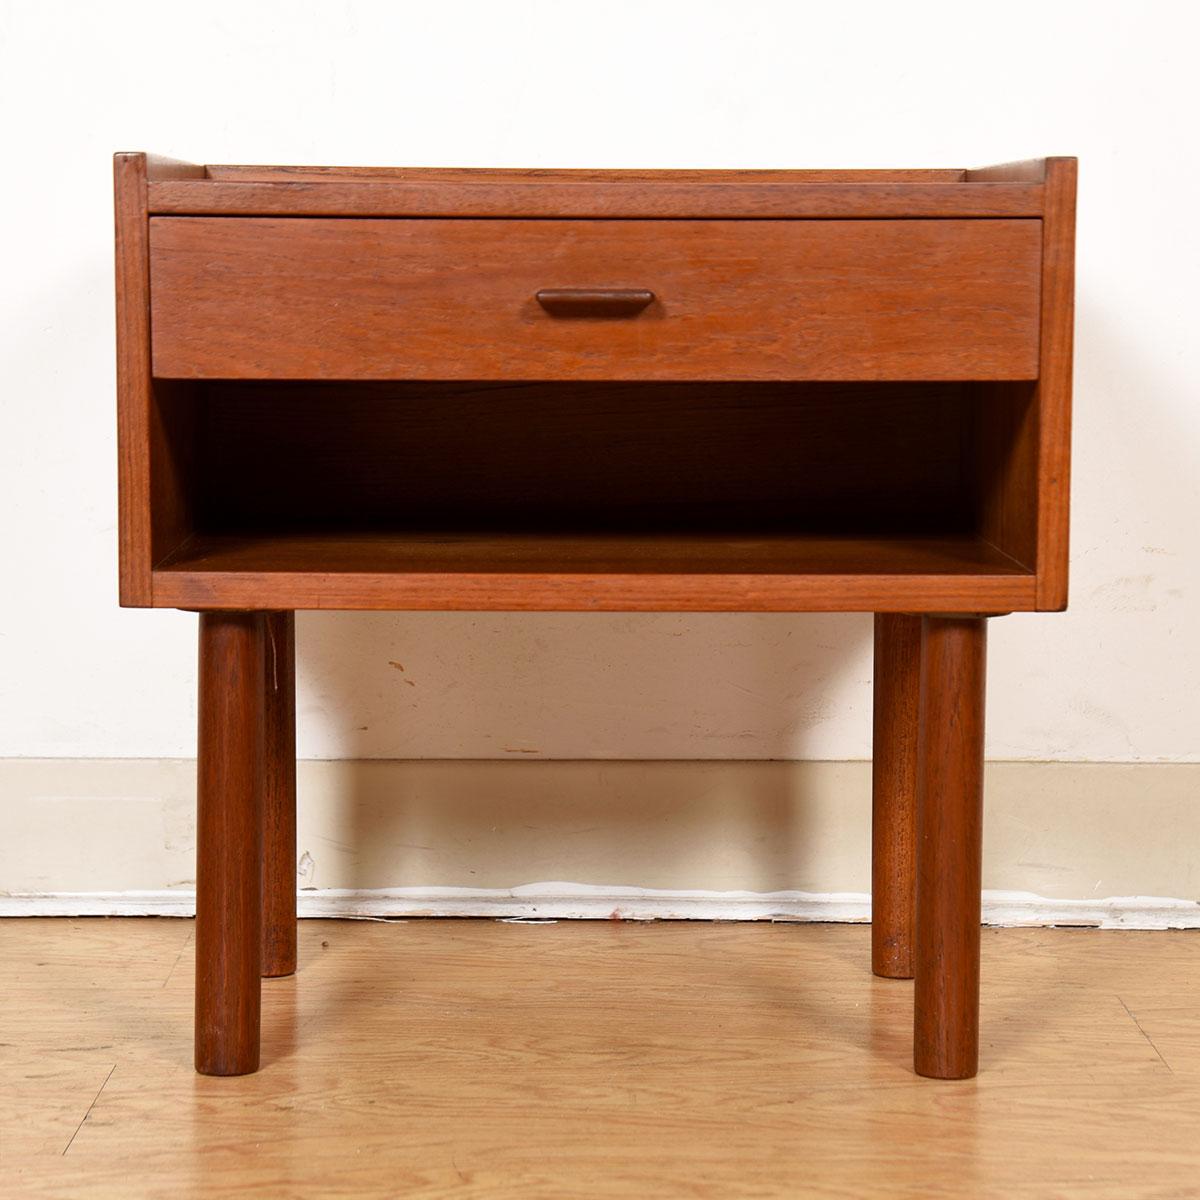 Danish Teak Nightstand / End Table with Finished Backside by Hans Wegner In Excellent Condition For Sale In Kensington, MD